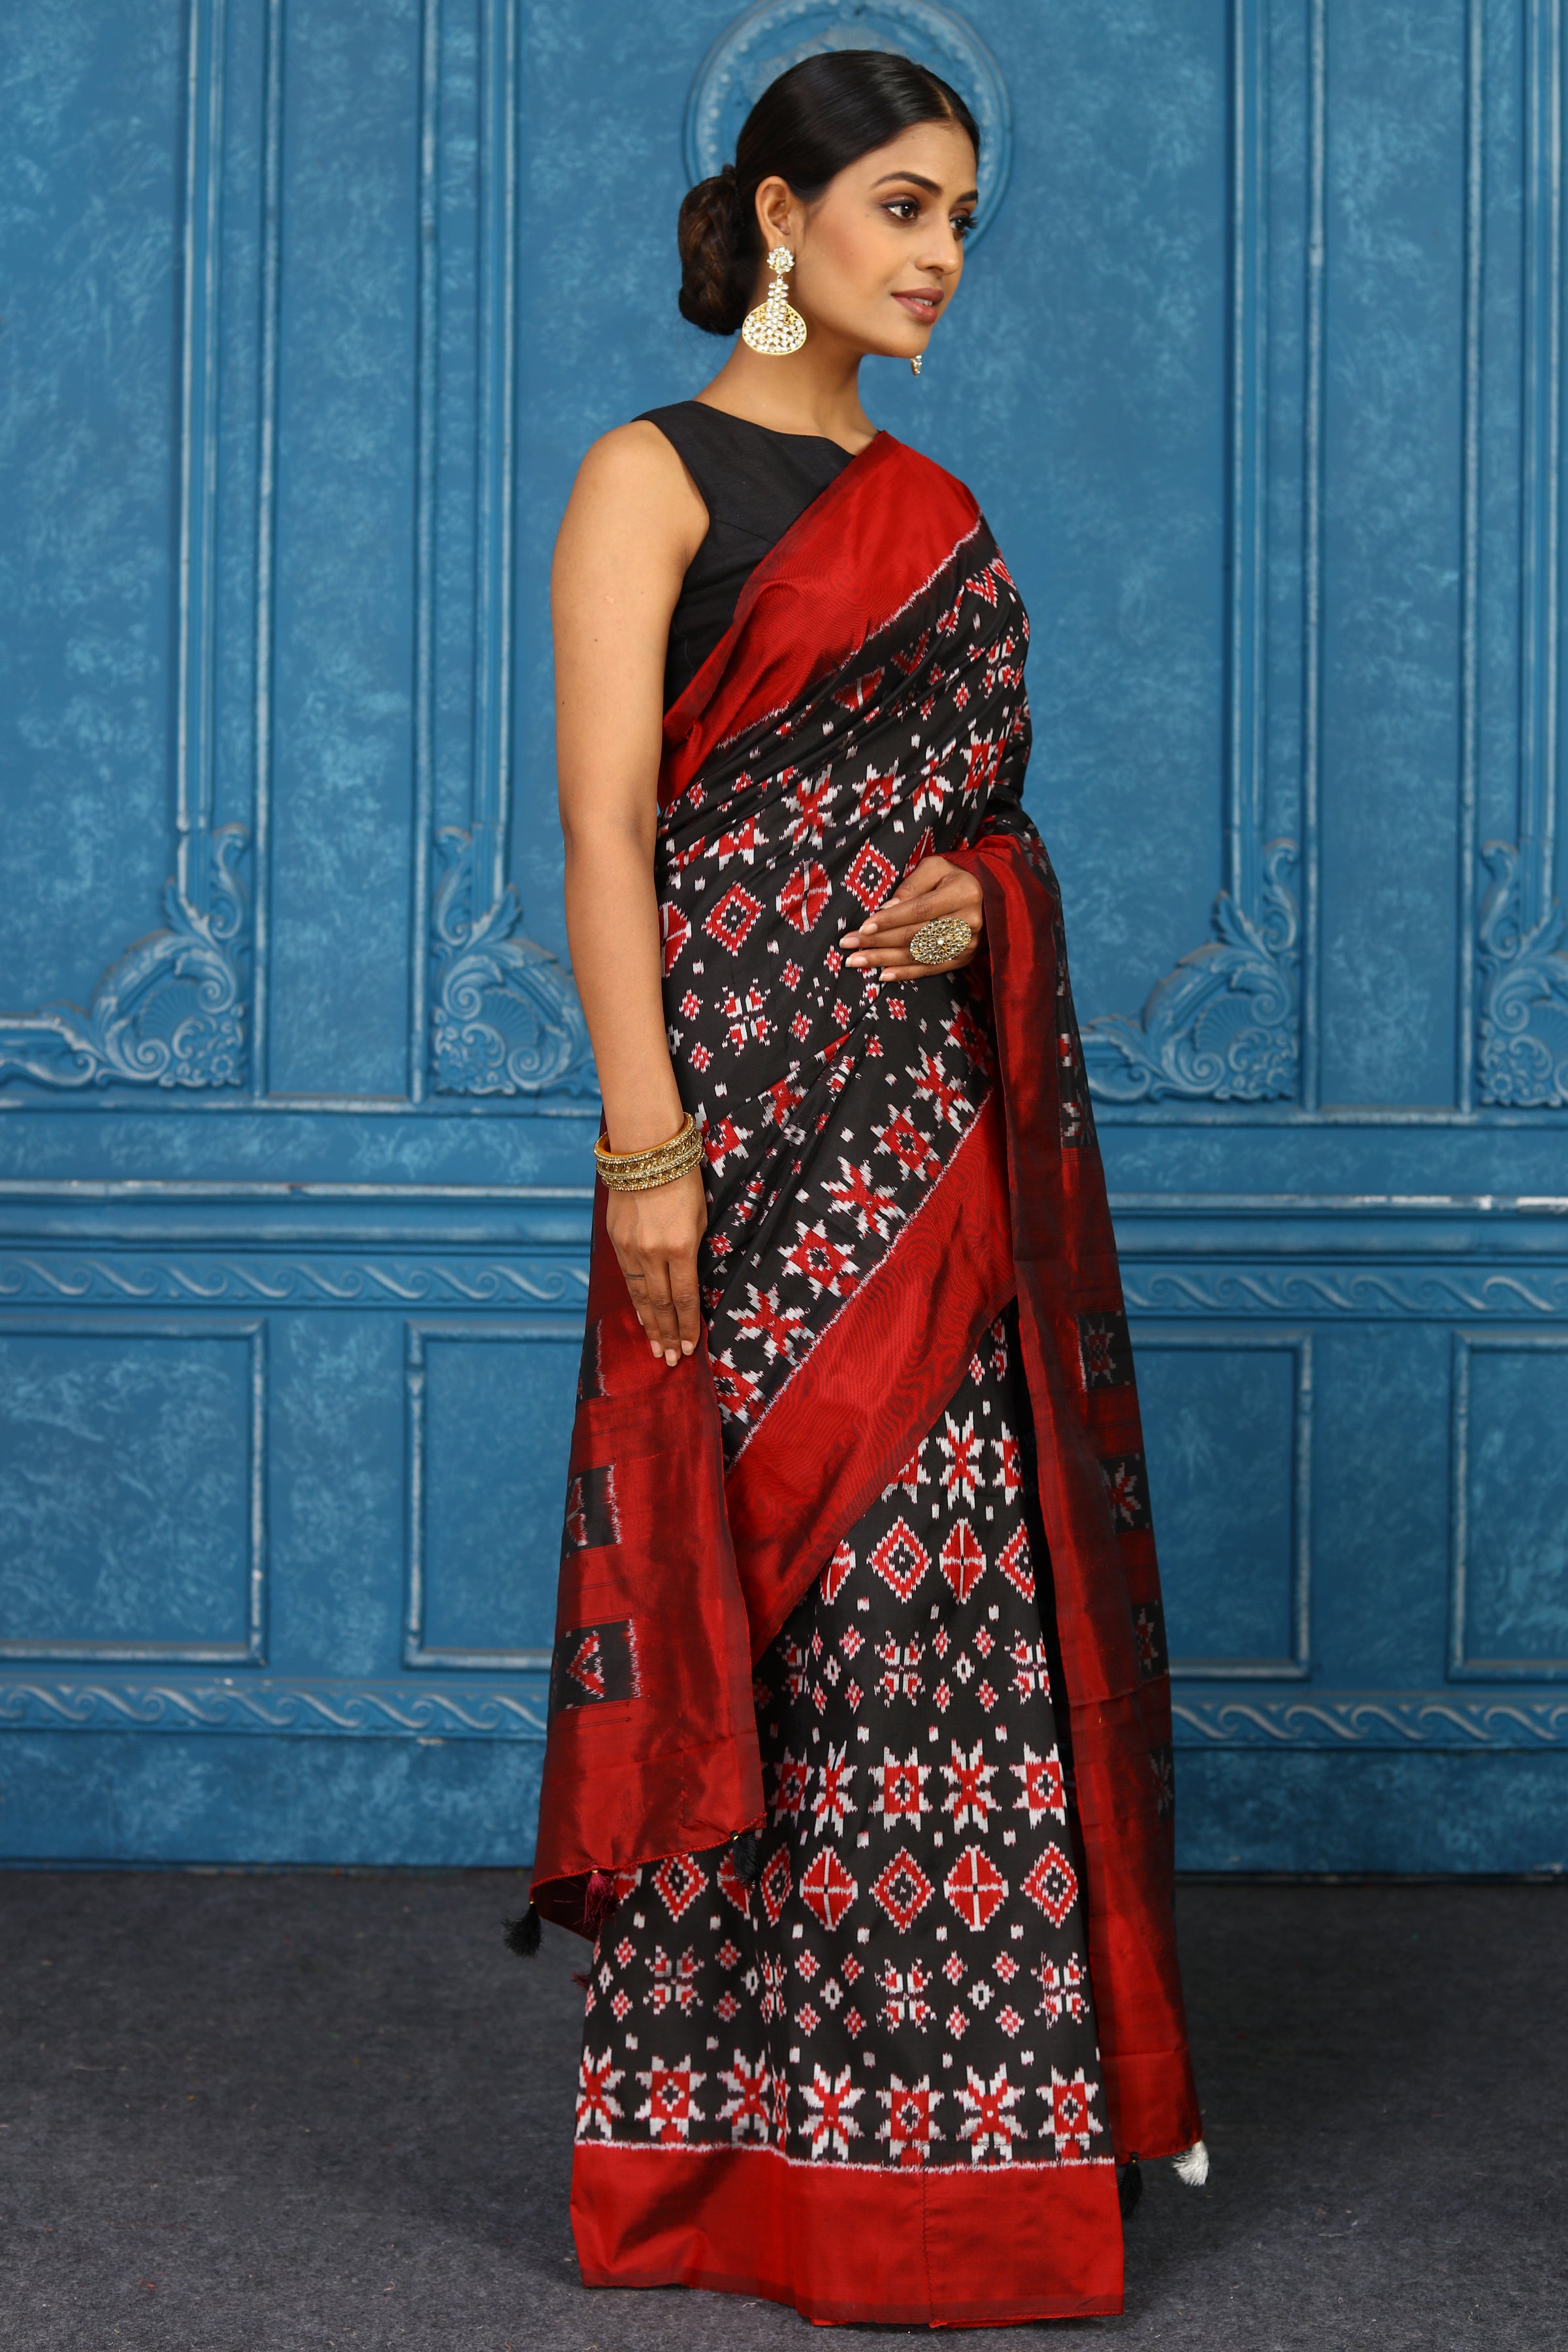 Buy black pochampally silk ikkat sari online in USA with red border. Look your best on festive occasions in latest designer sarees, pure silk sarees, Kanchipuram sarees, handwoven sarees, tussar silk sarees, embroidered sarees from Pure Elegance Indian clothing store in USA.-side